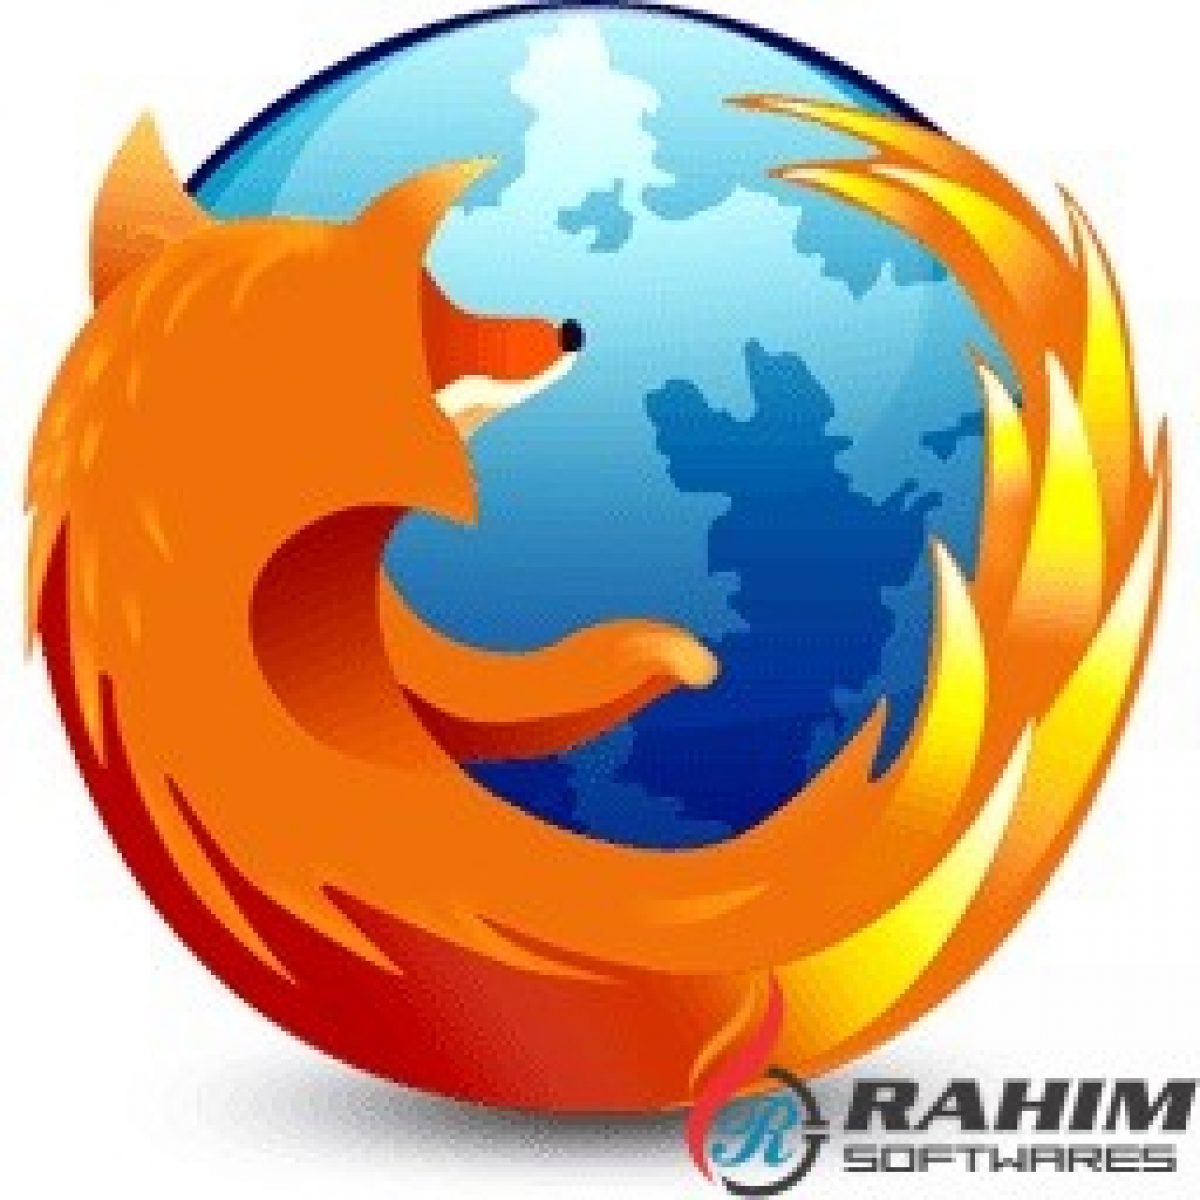 download version of firefox for os x 10.7.5